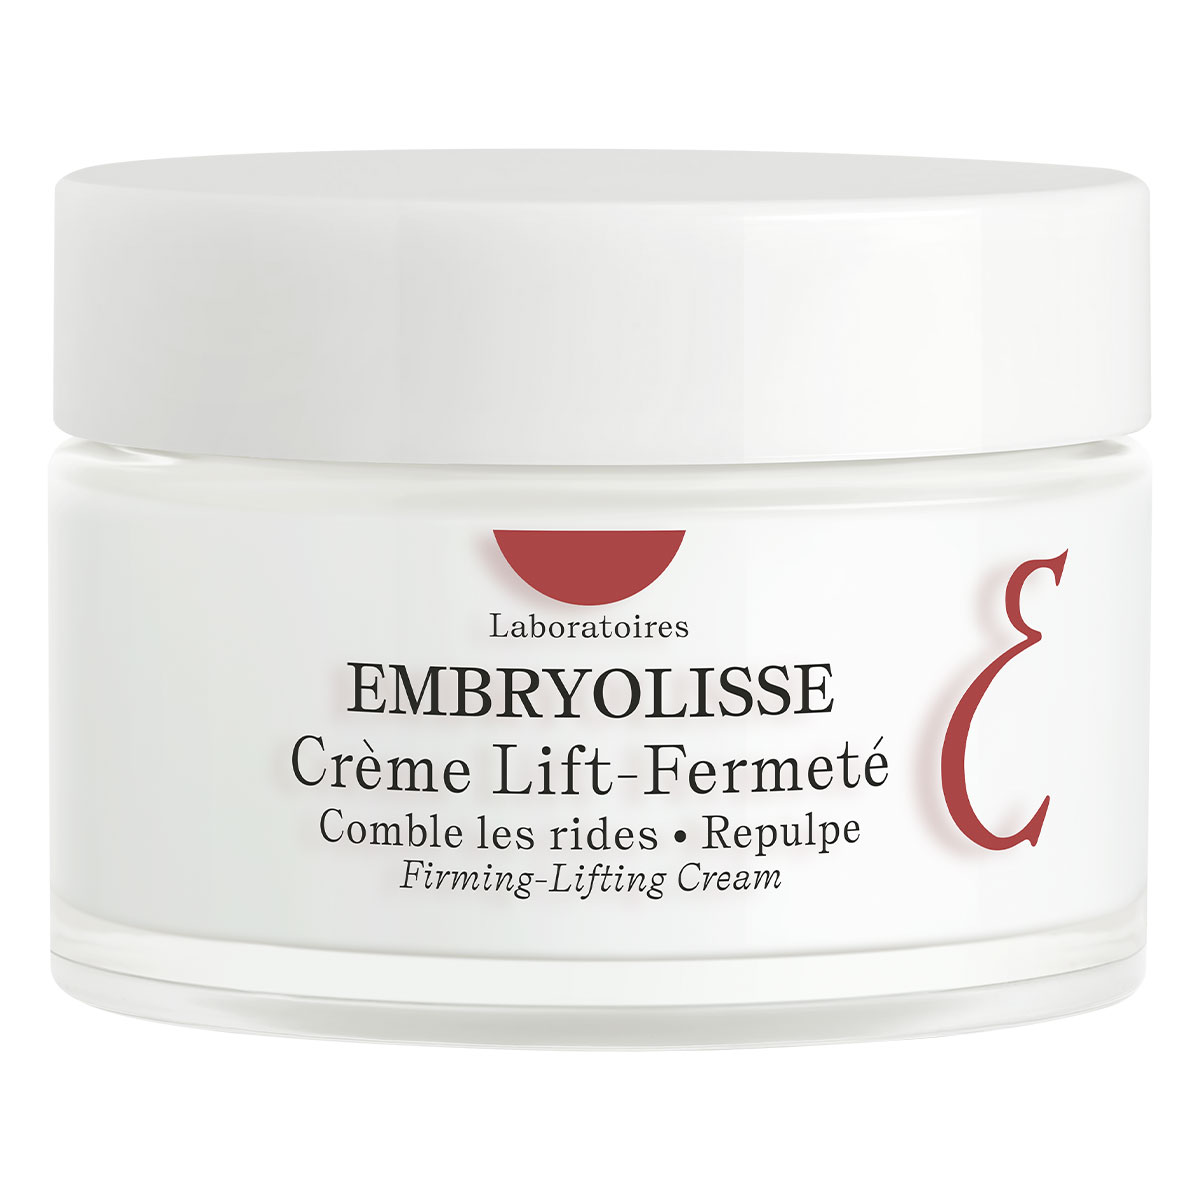 EMBRYOLISSE FIRMING-LIFTING CREAM